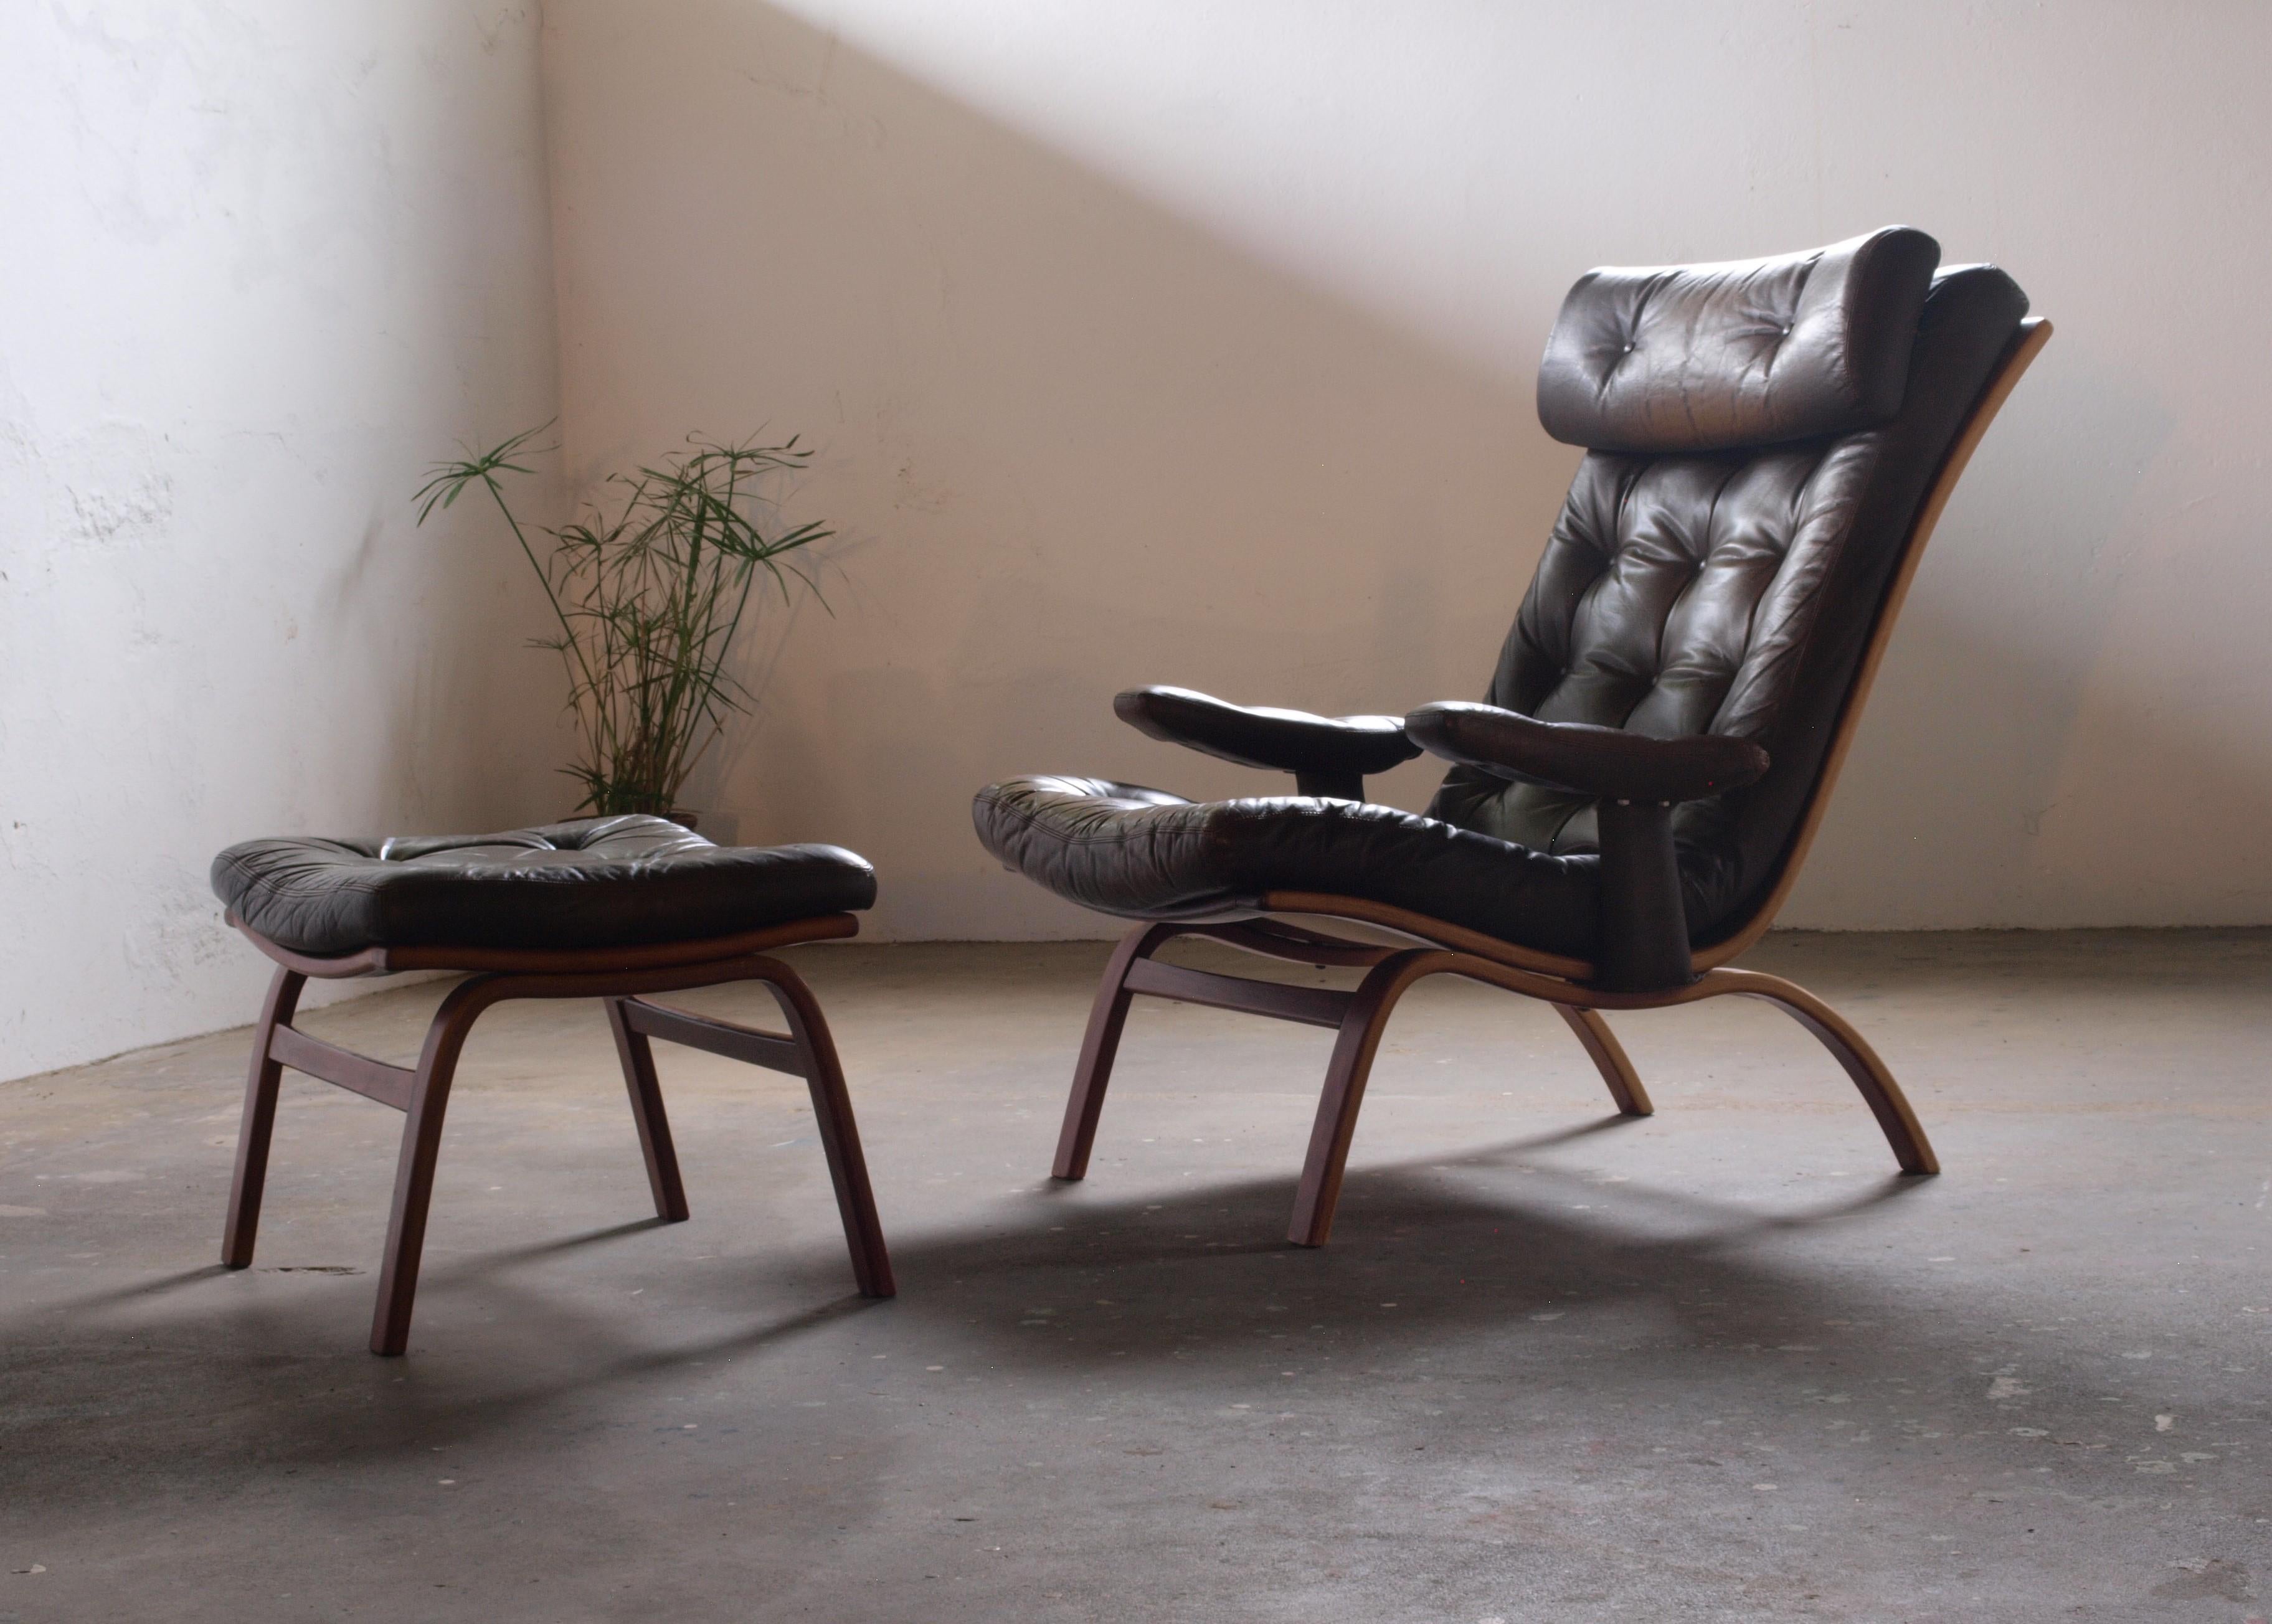 A lounge chair made in Sweden circa 1970s by Gote Møbler. Upholstered in soft brown buttoned leather, it features a high-quality build and is exceptionally comfortable. The chair includes an additional headrest cushion for added comfort. 

The bent